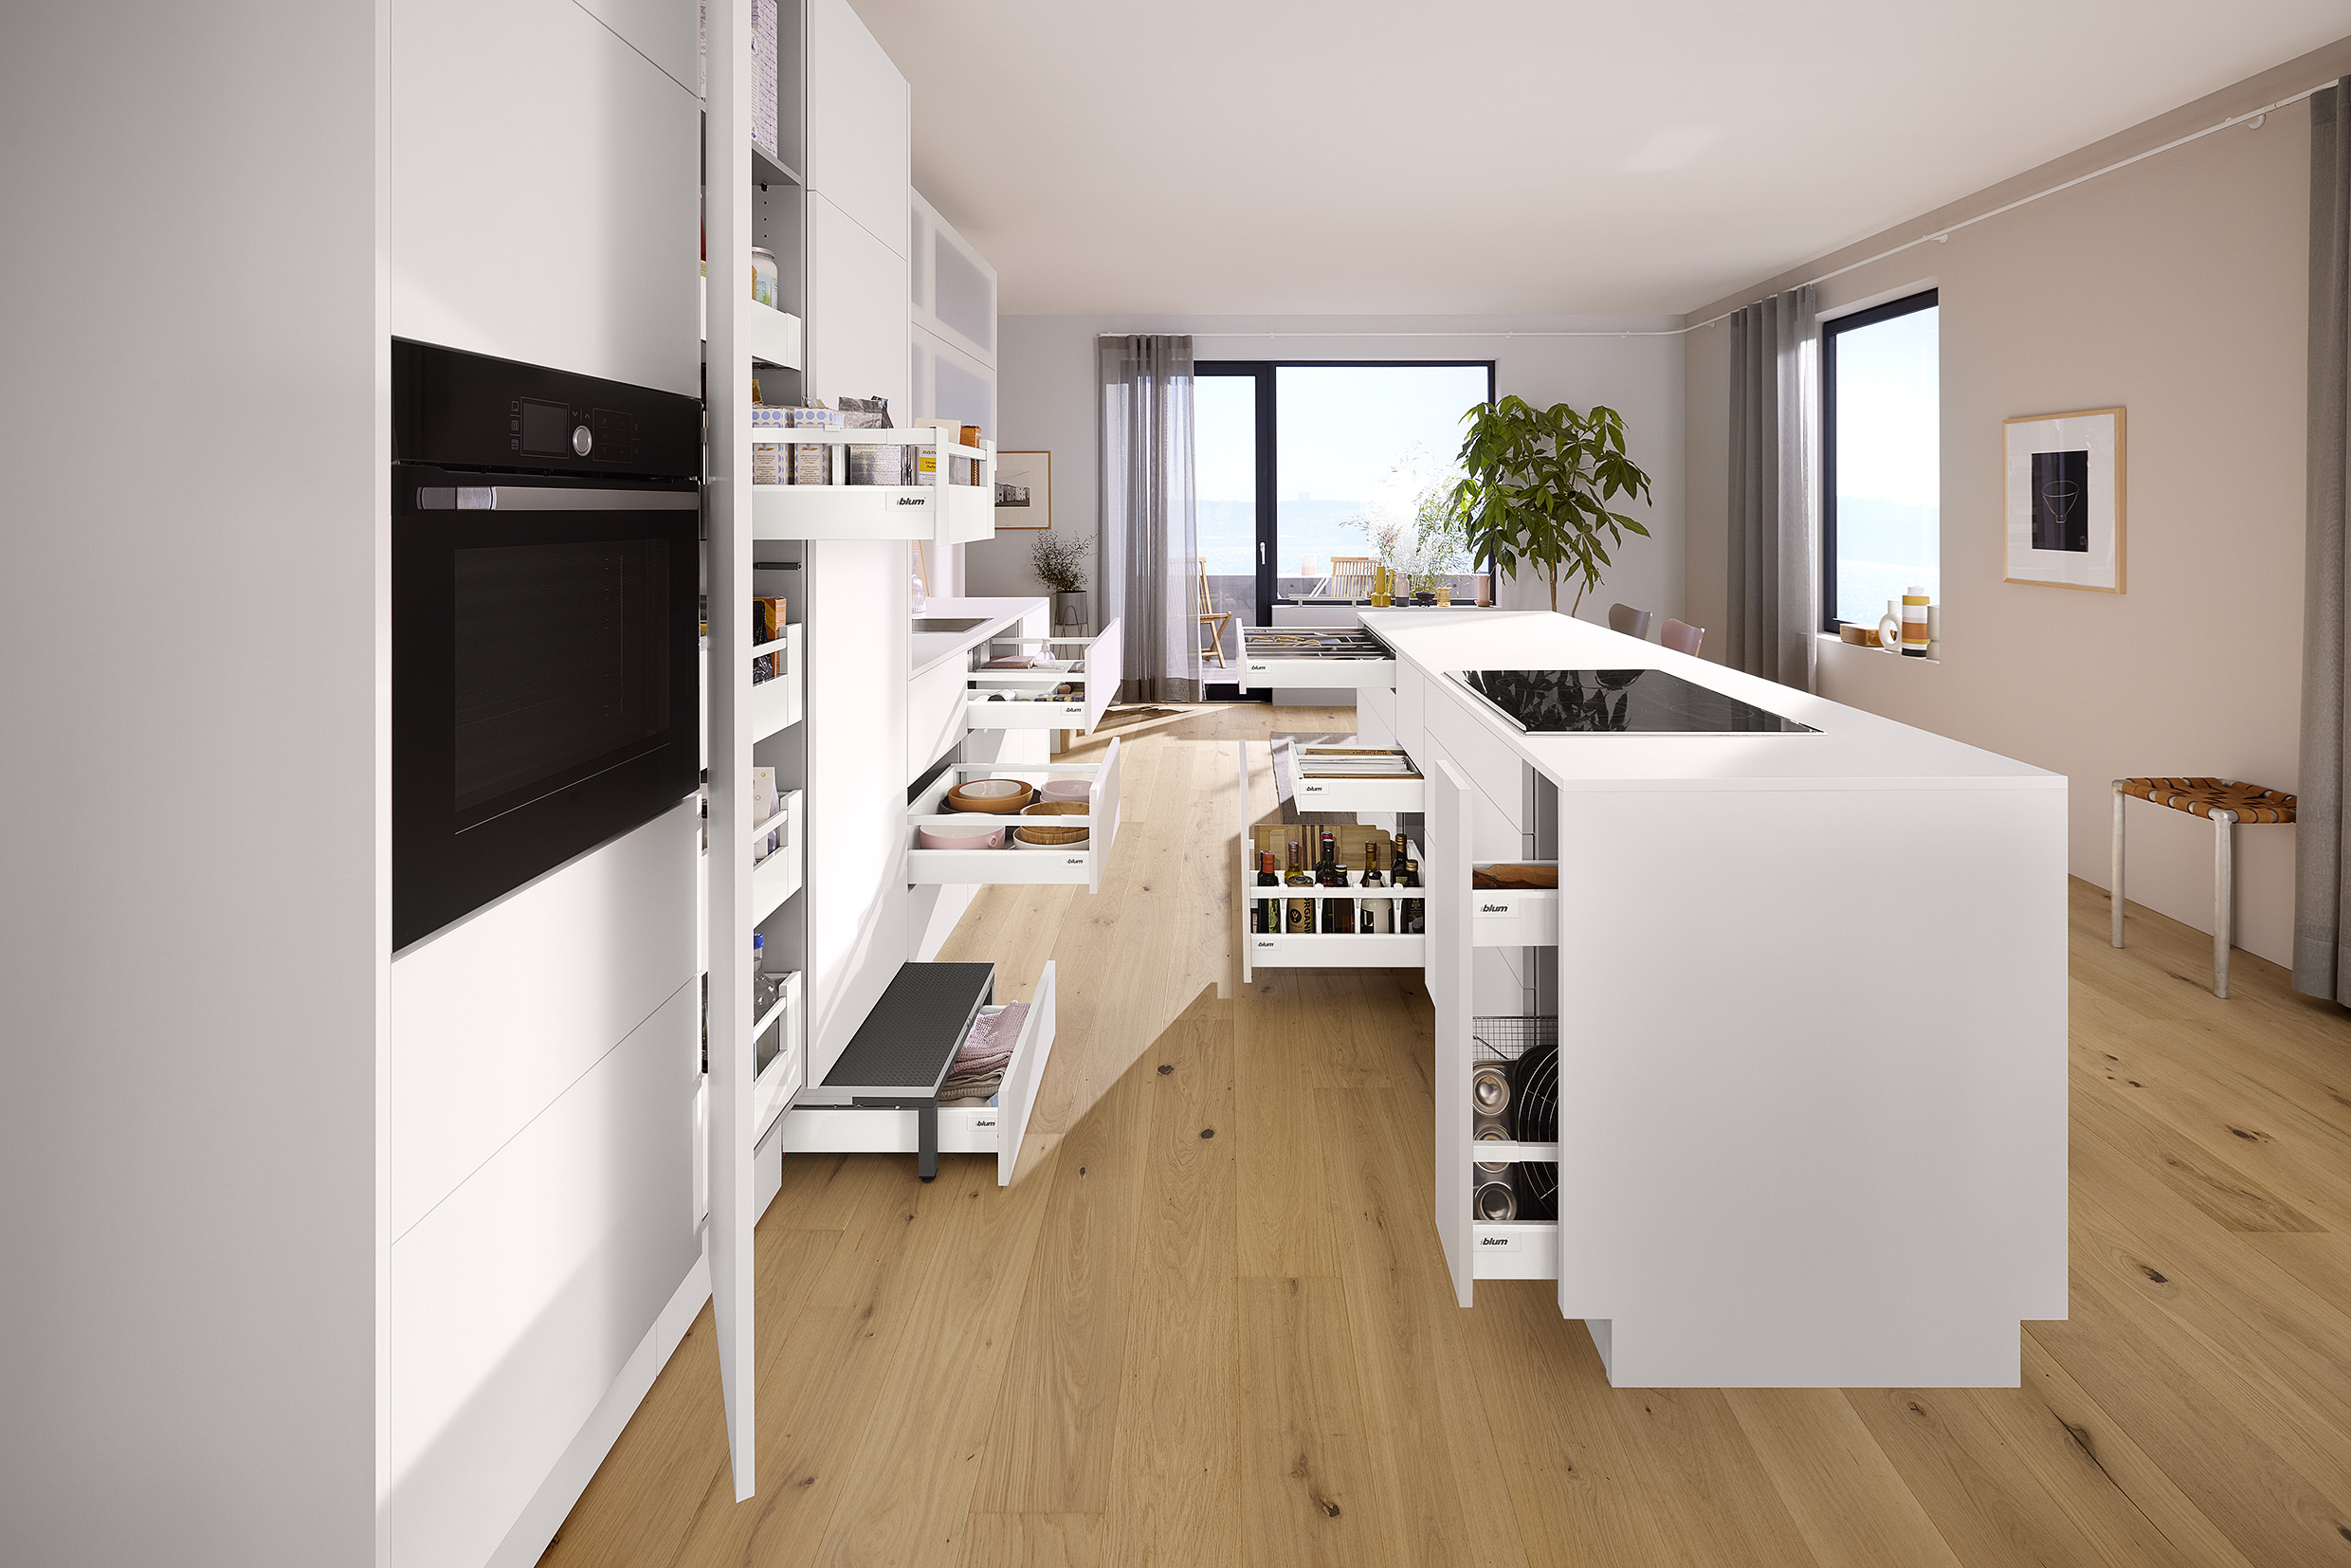 Cabinet applications for more storage space | Blum